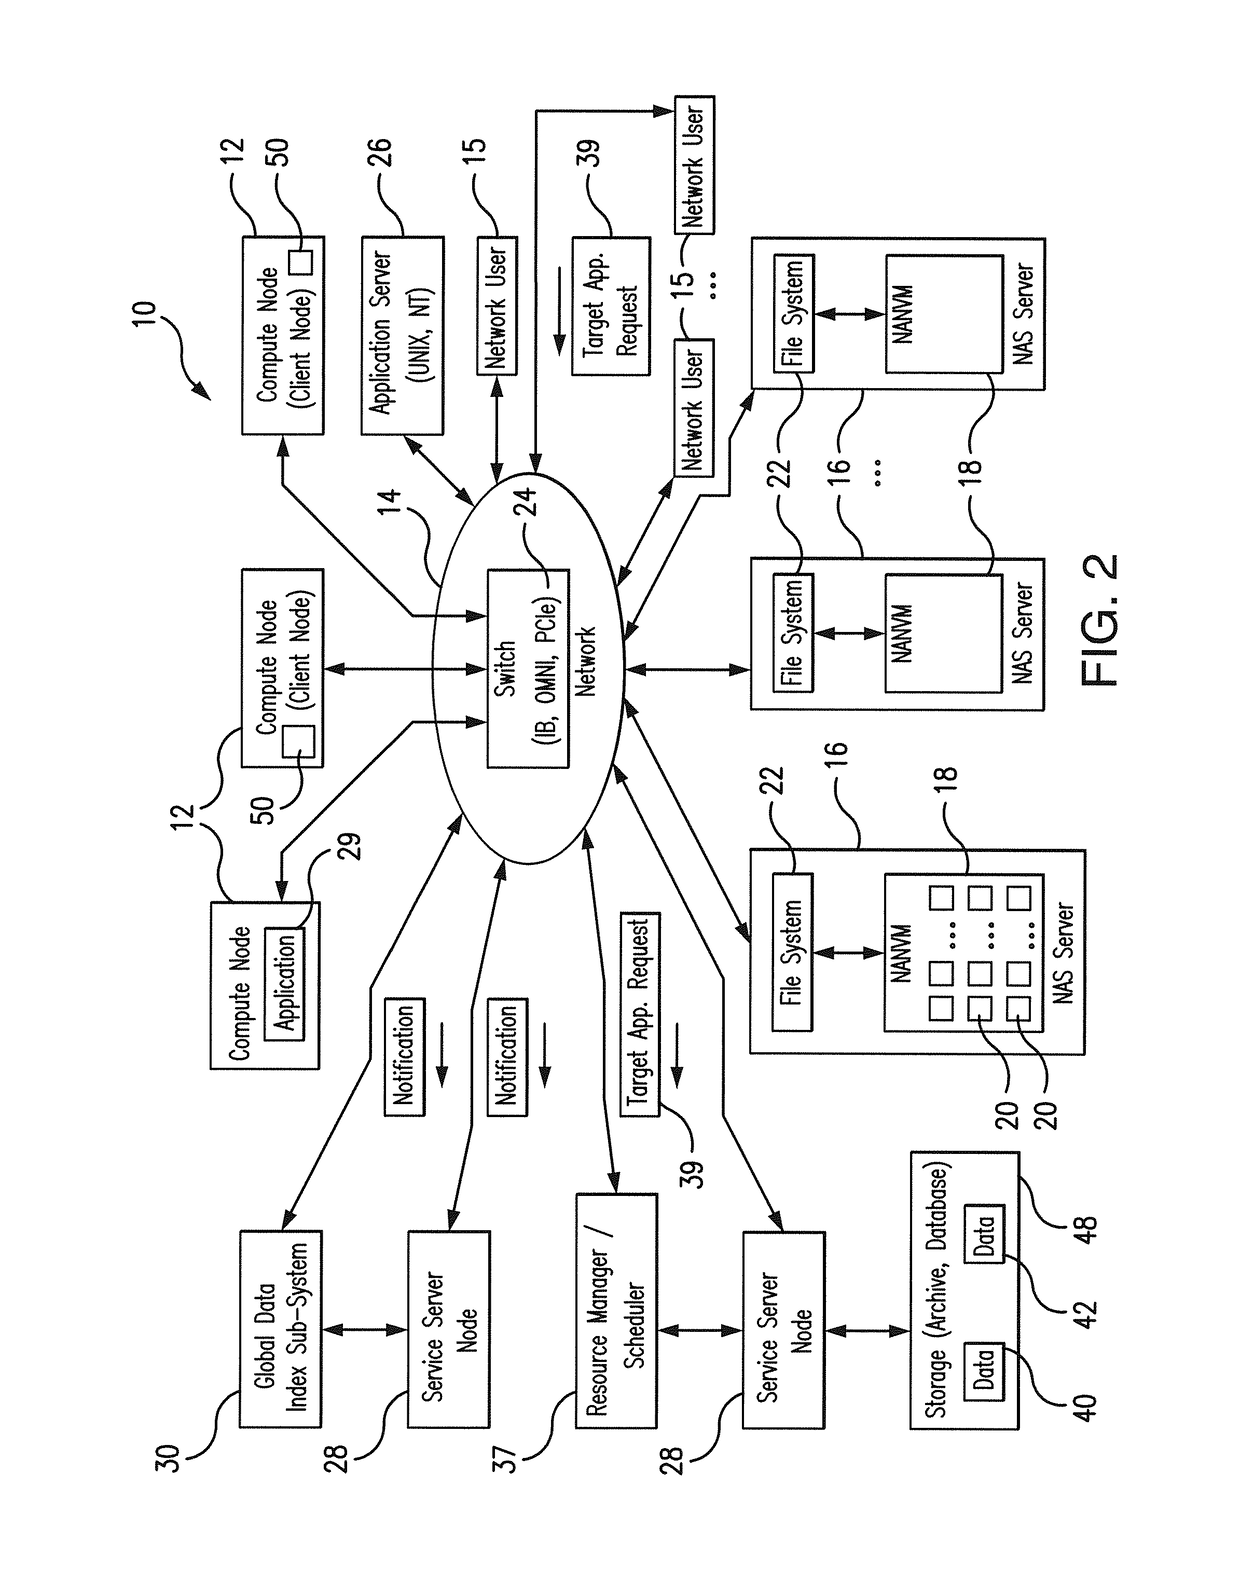 System and method for scale-out node-local data caching using network-attached non-volatile memories